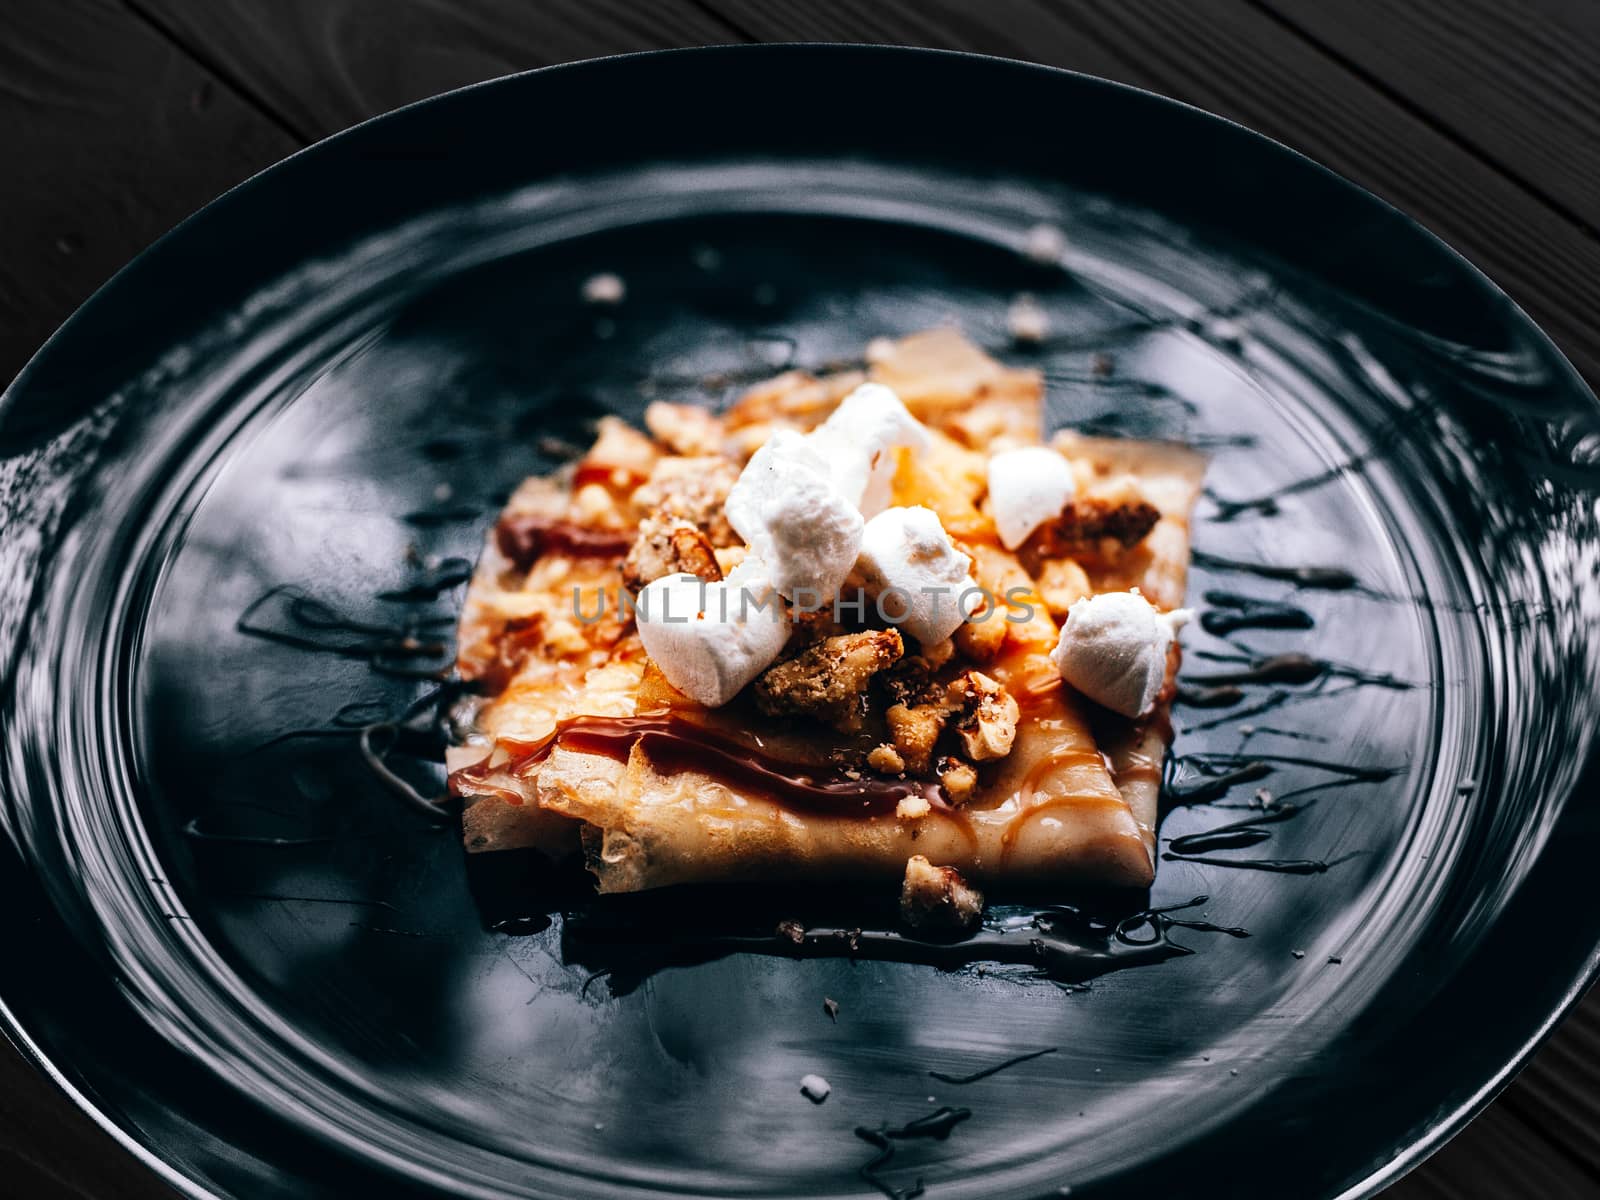 Plate with folded pancake caramel coated walnuts and marshmallow by Opikanets